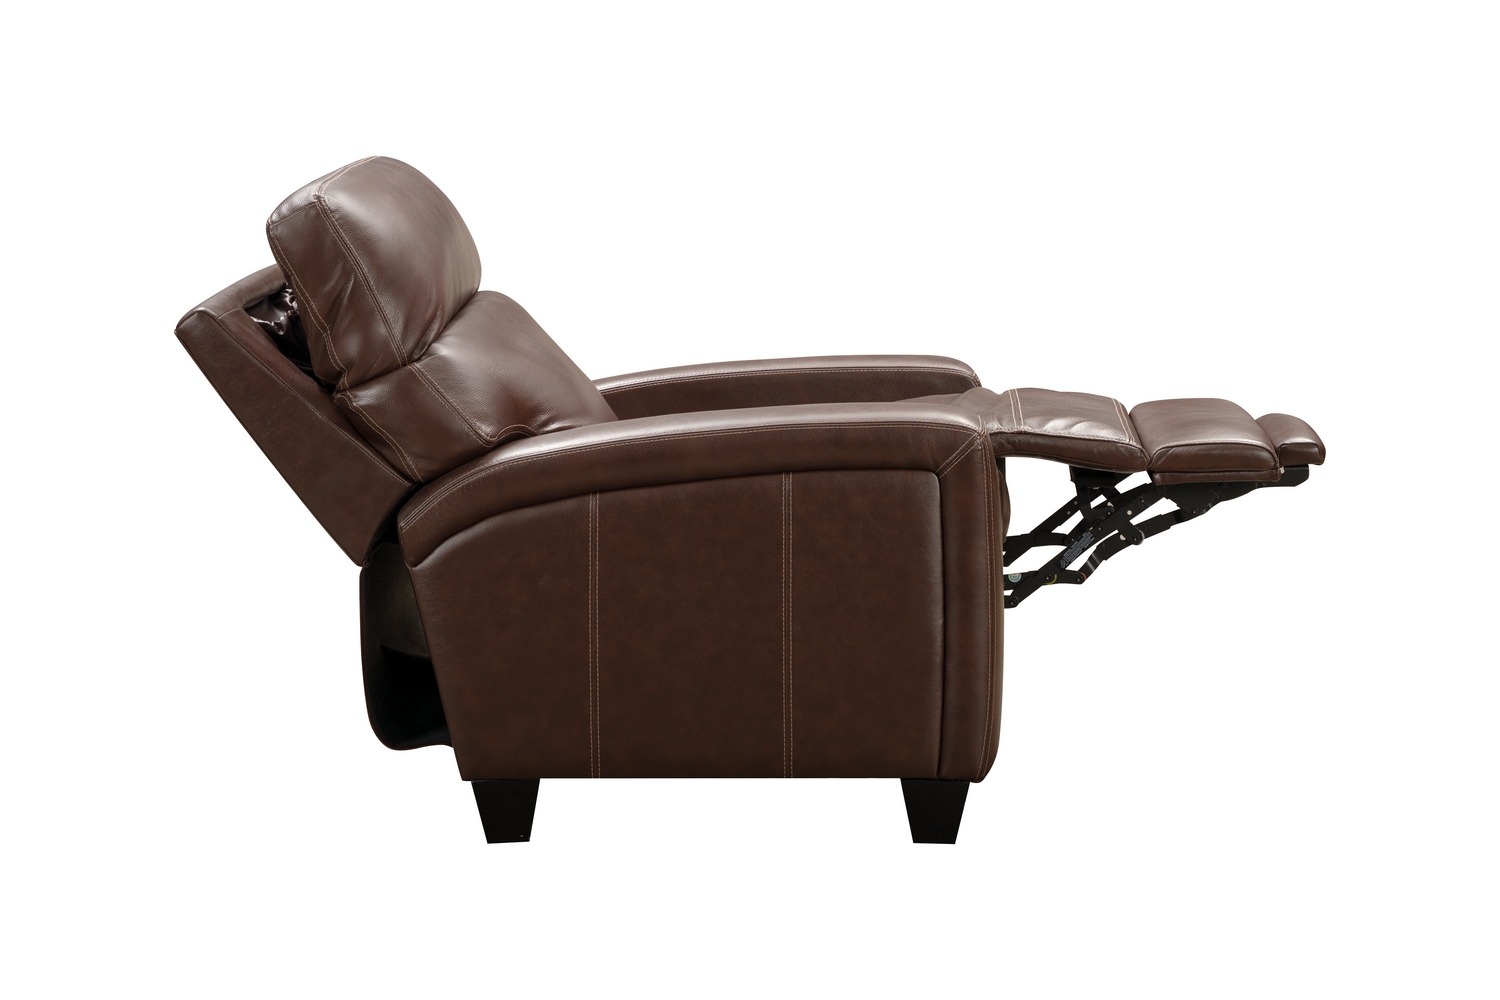 Barcalounger Marcello Power Recliner Chair with Power Head Rest and Power Lumbar - Castleton Rustic Brown/Leather Match